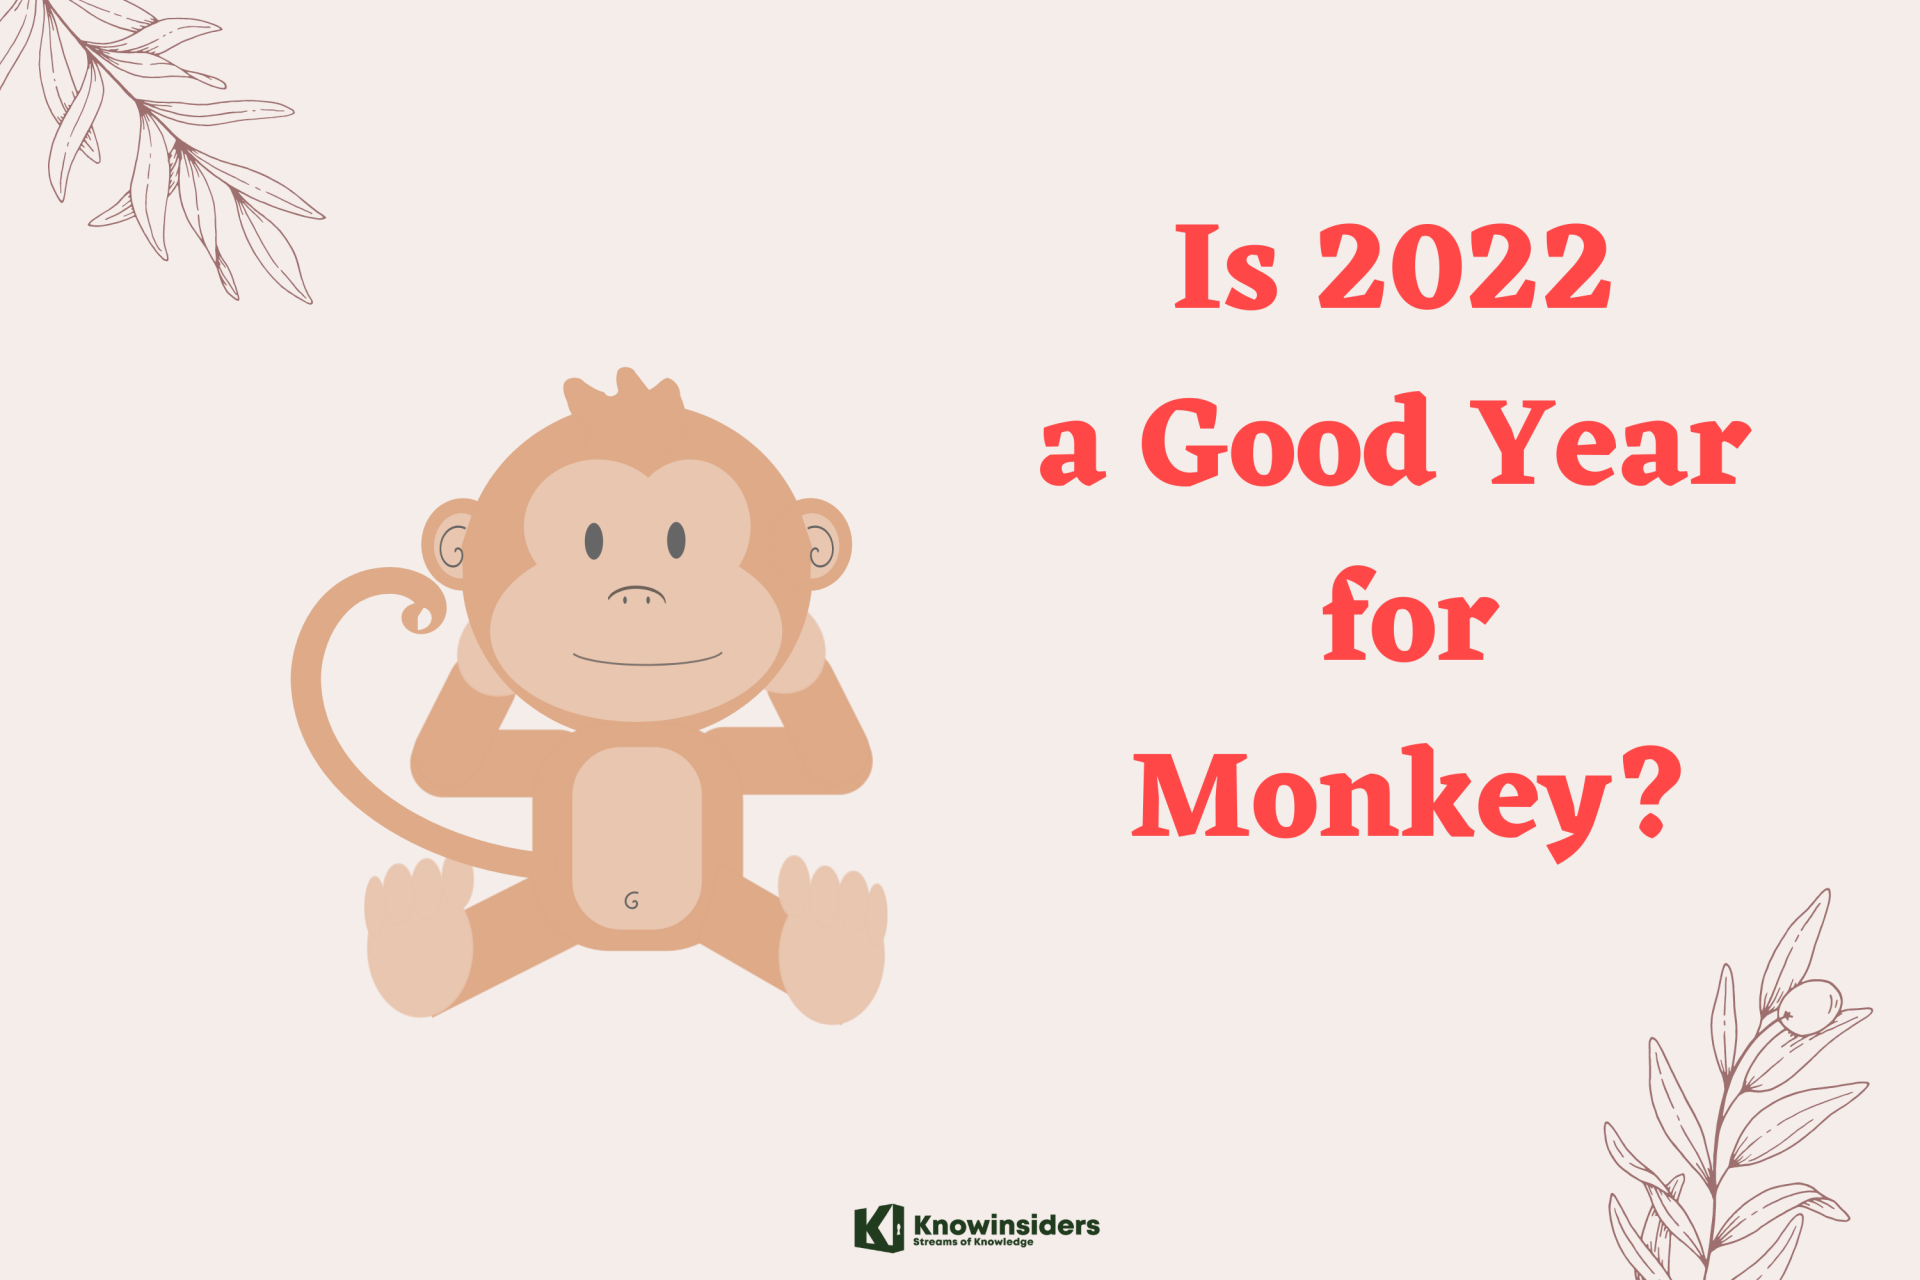 Is 2022 A Good Year for Monkey?